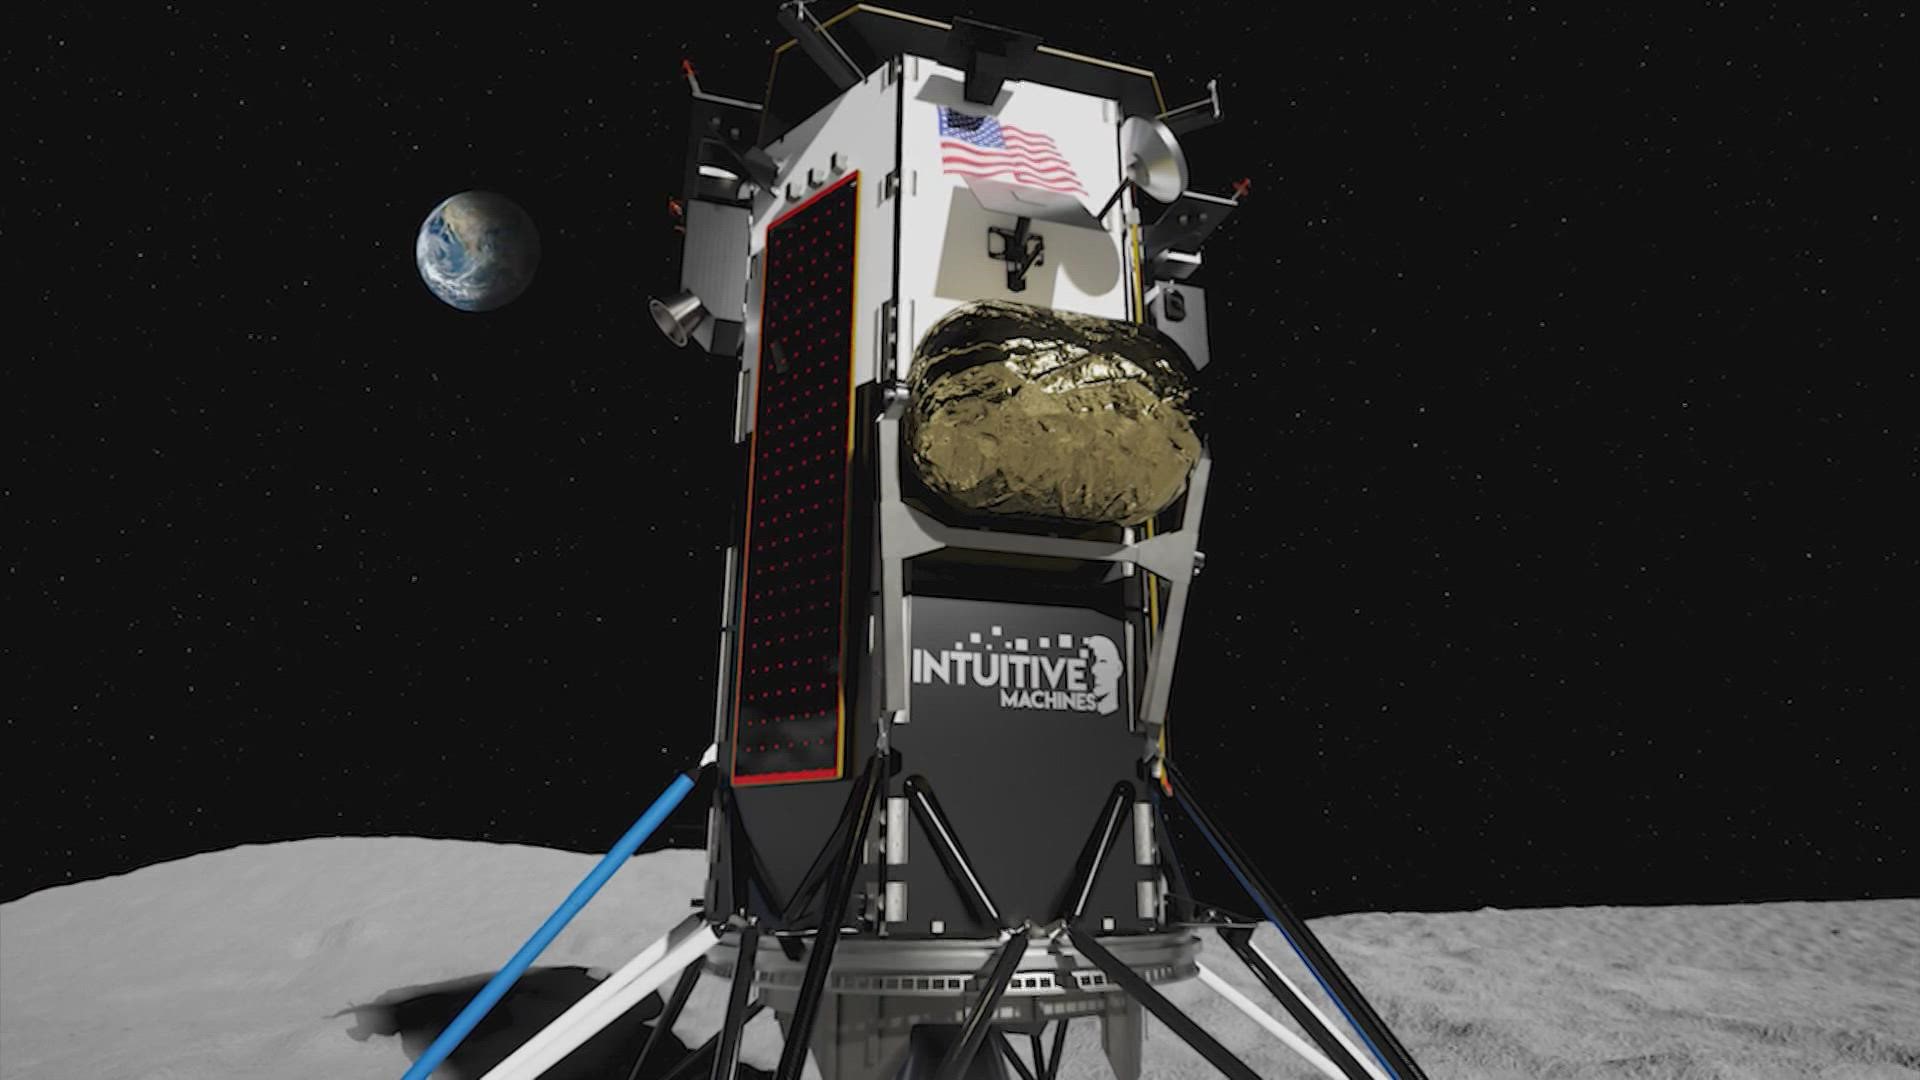 Intuitive Machines will deliver four science and technology demonstration payloads for NASA.